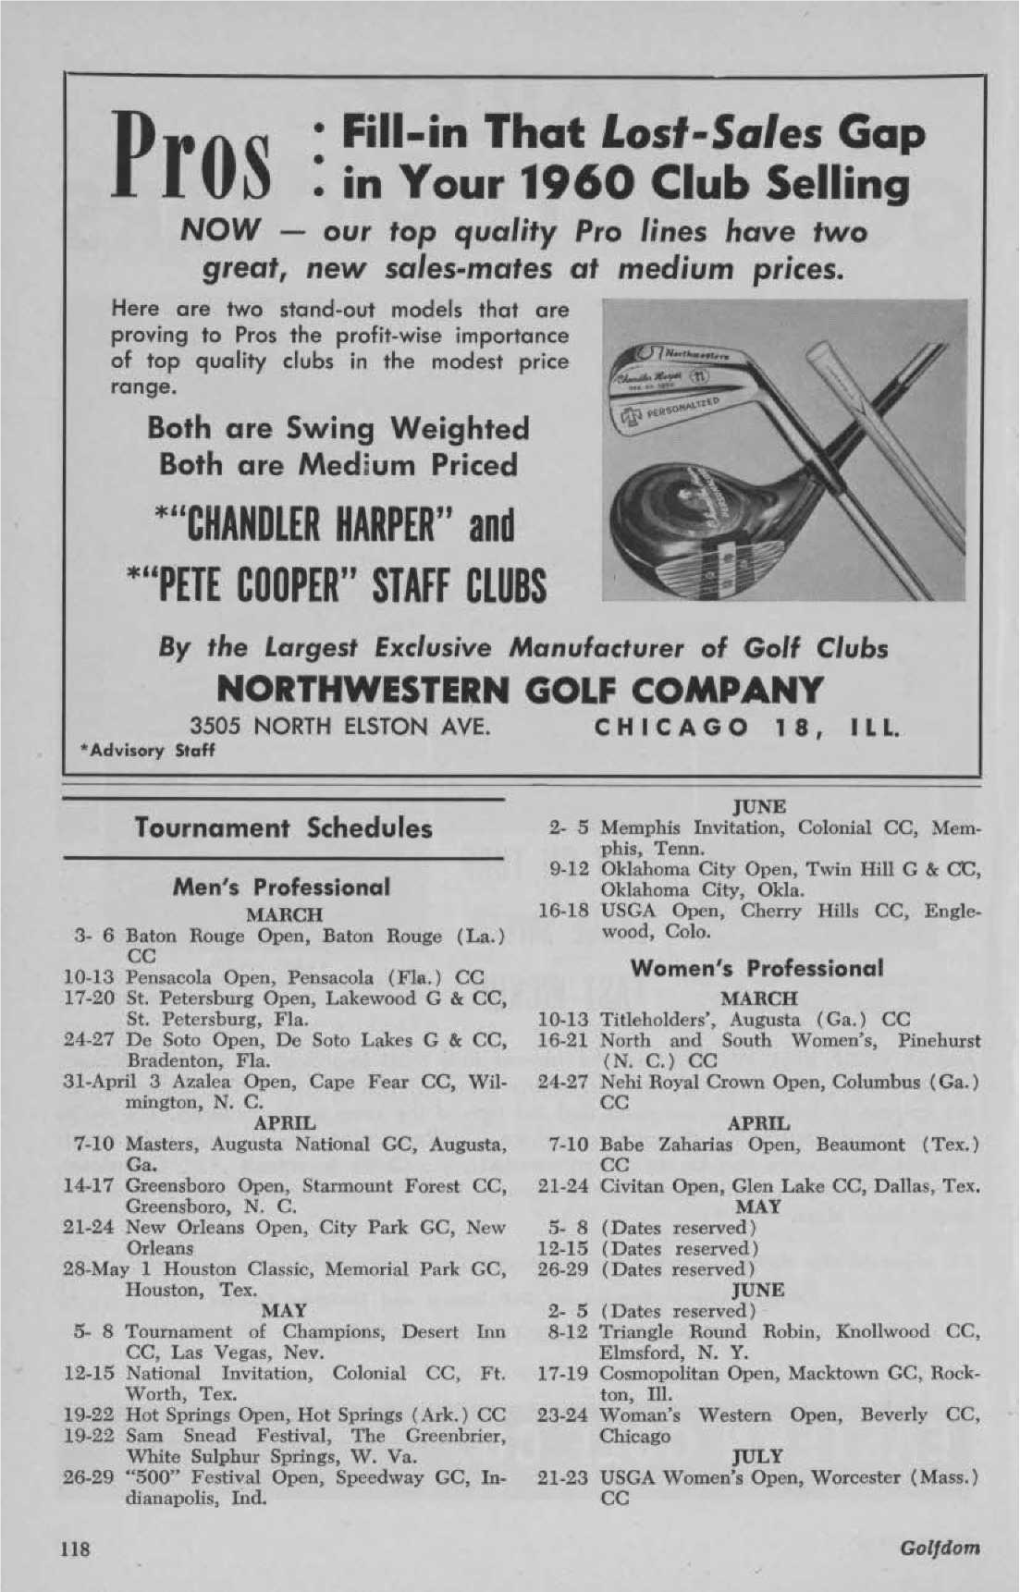 Fill-In That Lost-Sales Gap I in Your 1960 Club Selling CHANDLER HARPER" and PETE COOPER"